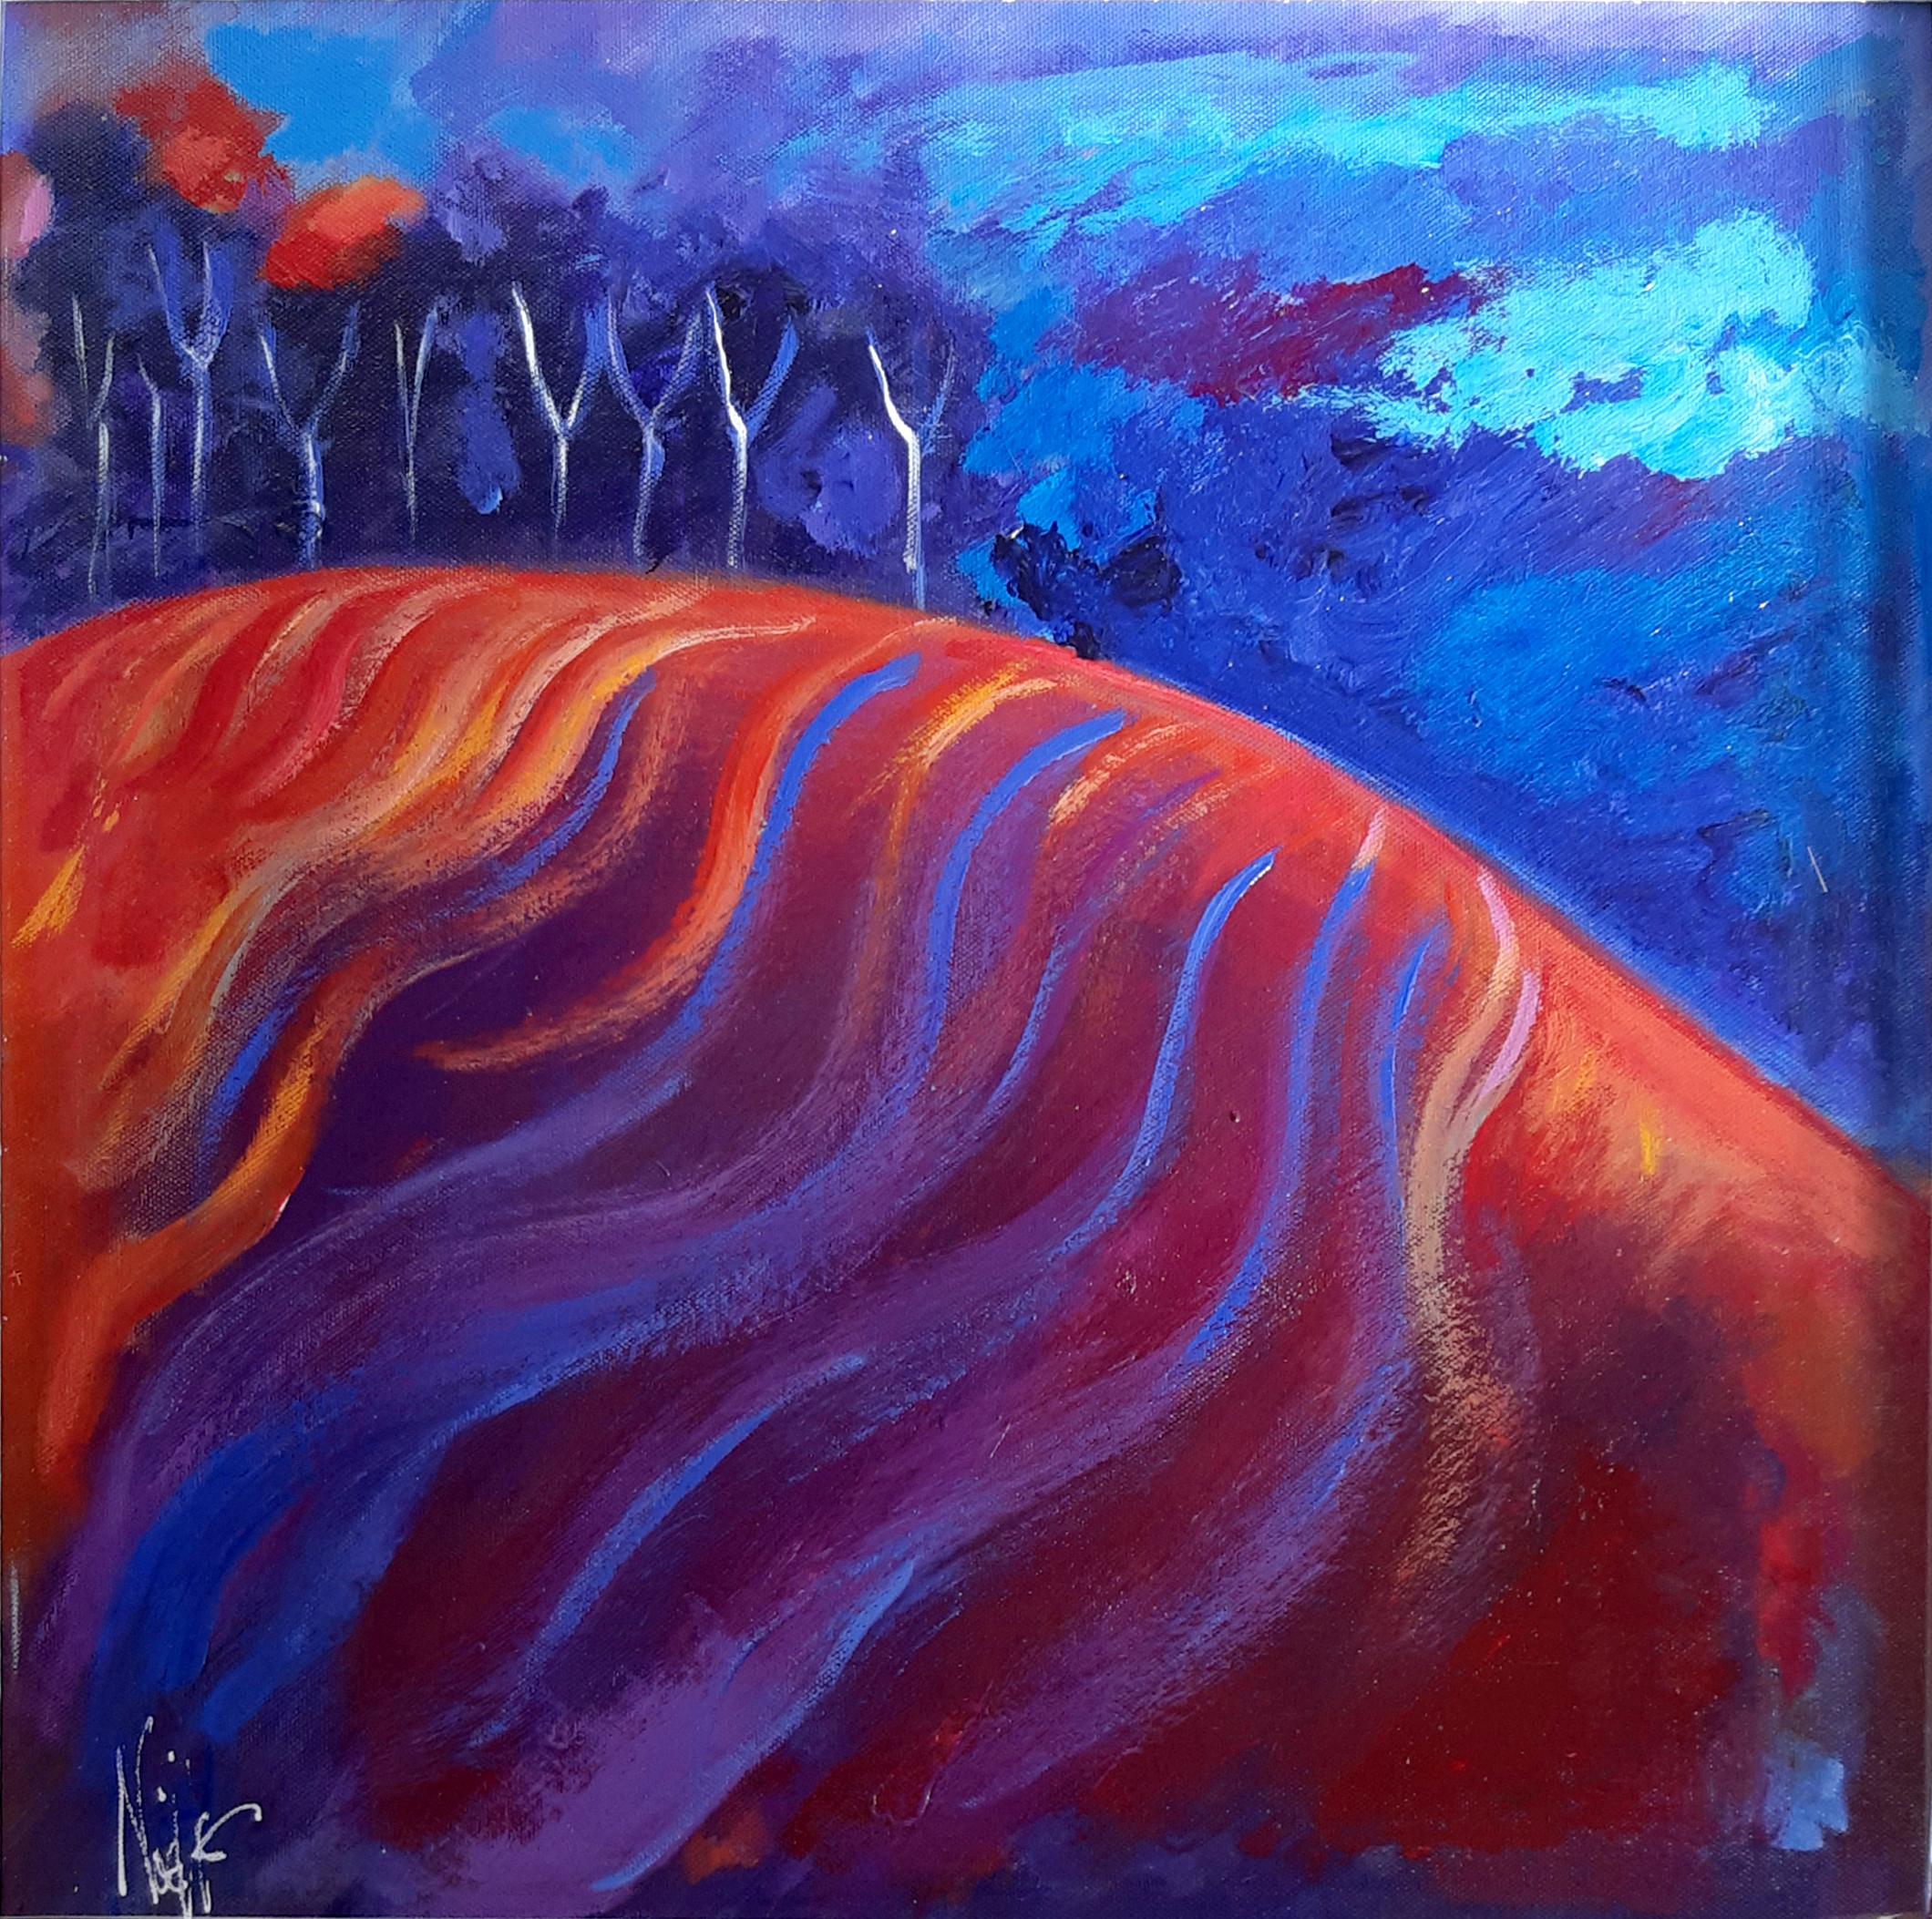 In this acrylic painting by Northern Irish Artist Noelle McAlinden, the artist features a bright red, orange and gold striped foreground field contrasted with a deep purple sky with wish-bone trees.  This  semi-abstract landscape with its dramatic